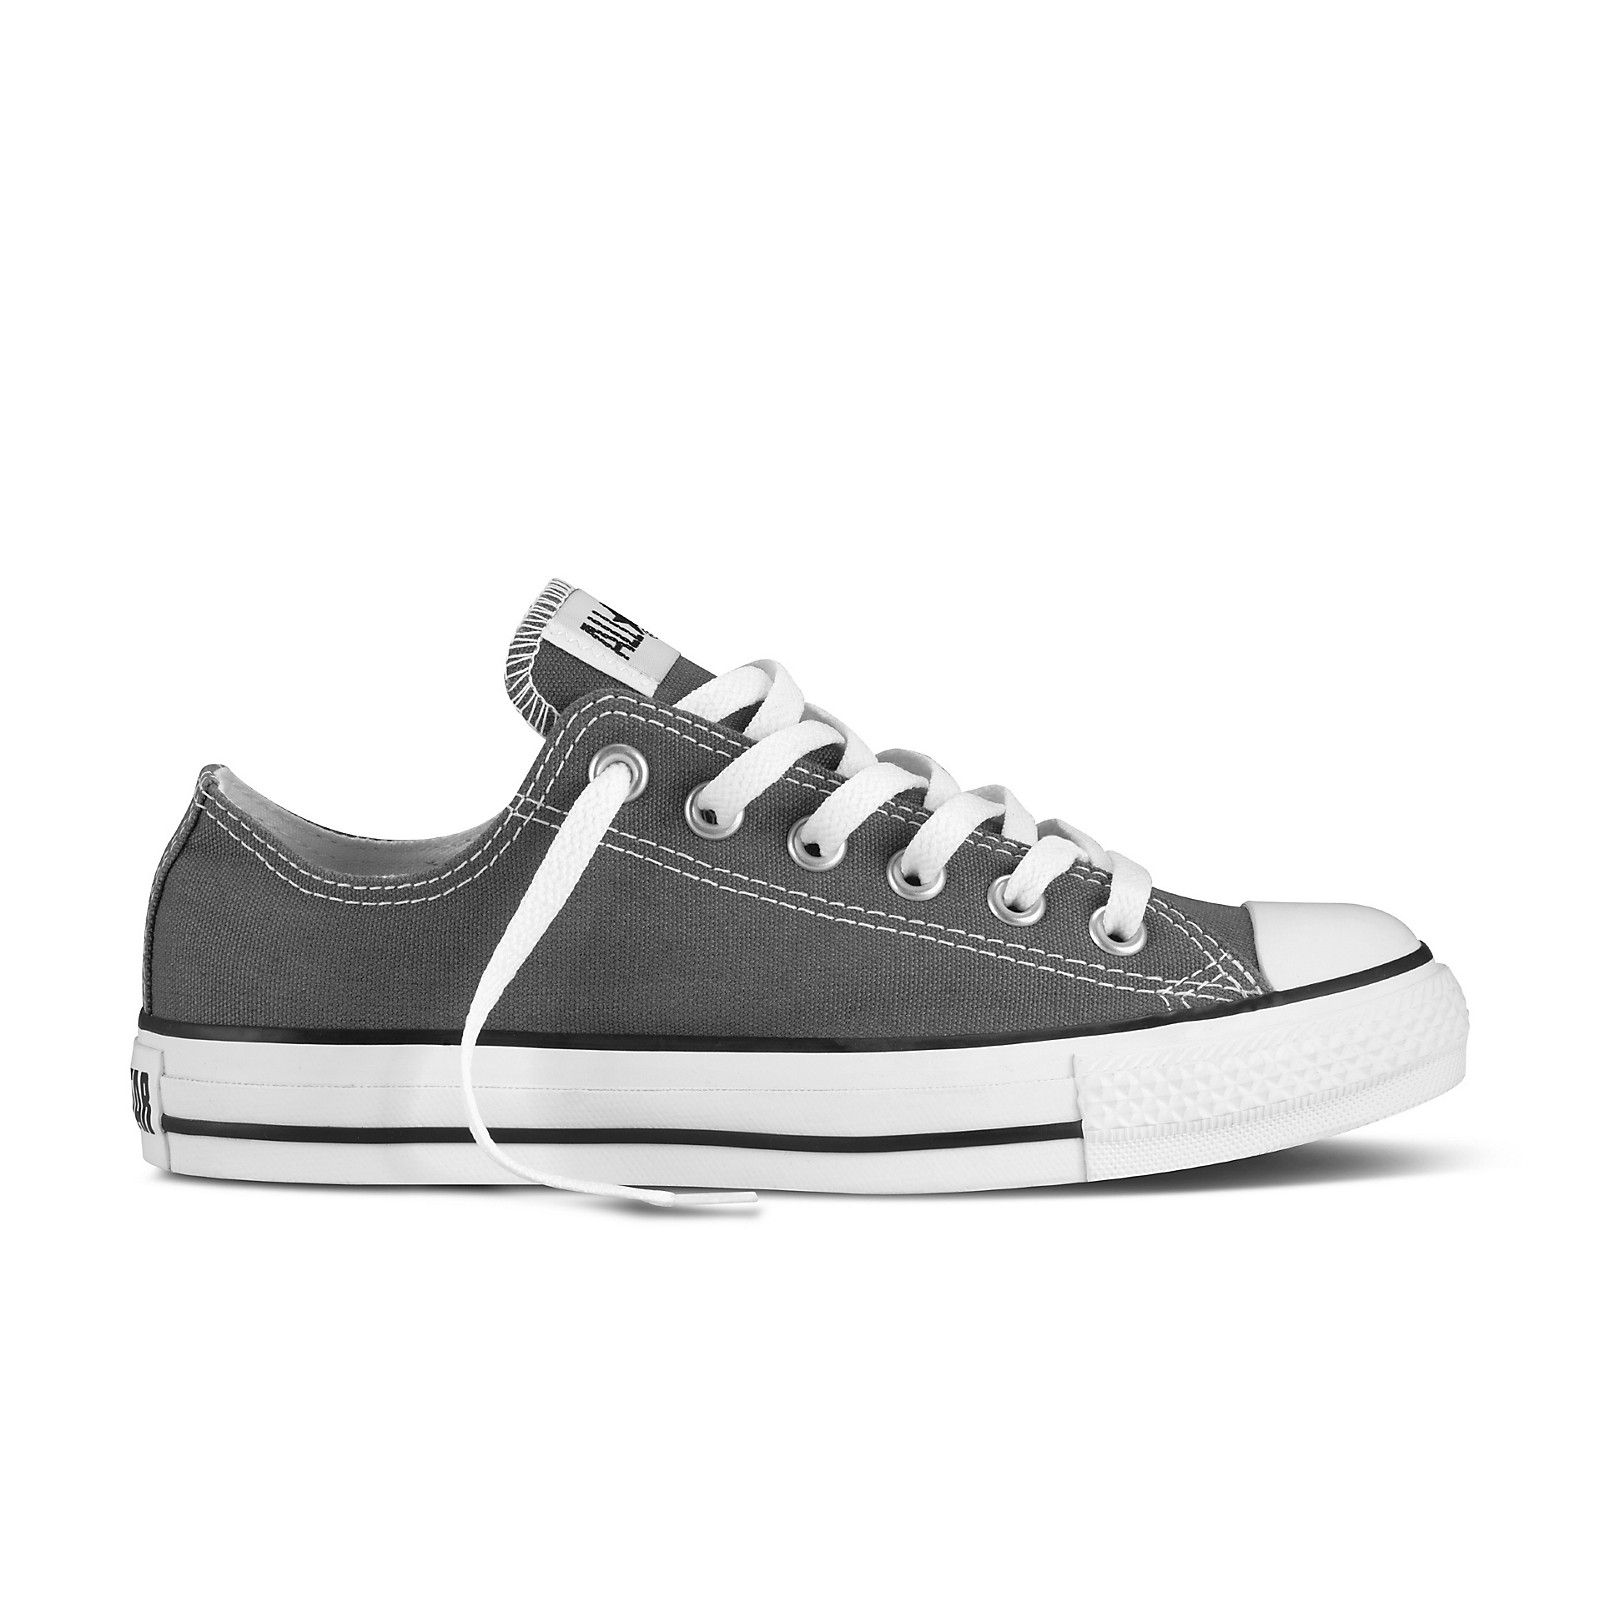 Converse Chuck Taylor All Star Core Oxford Low-Top Charcoal | Musician ...